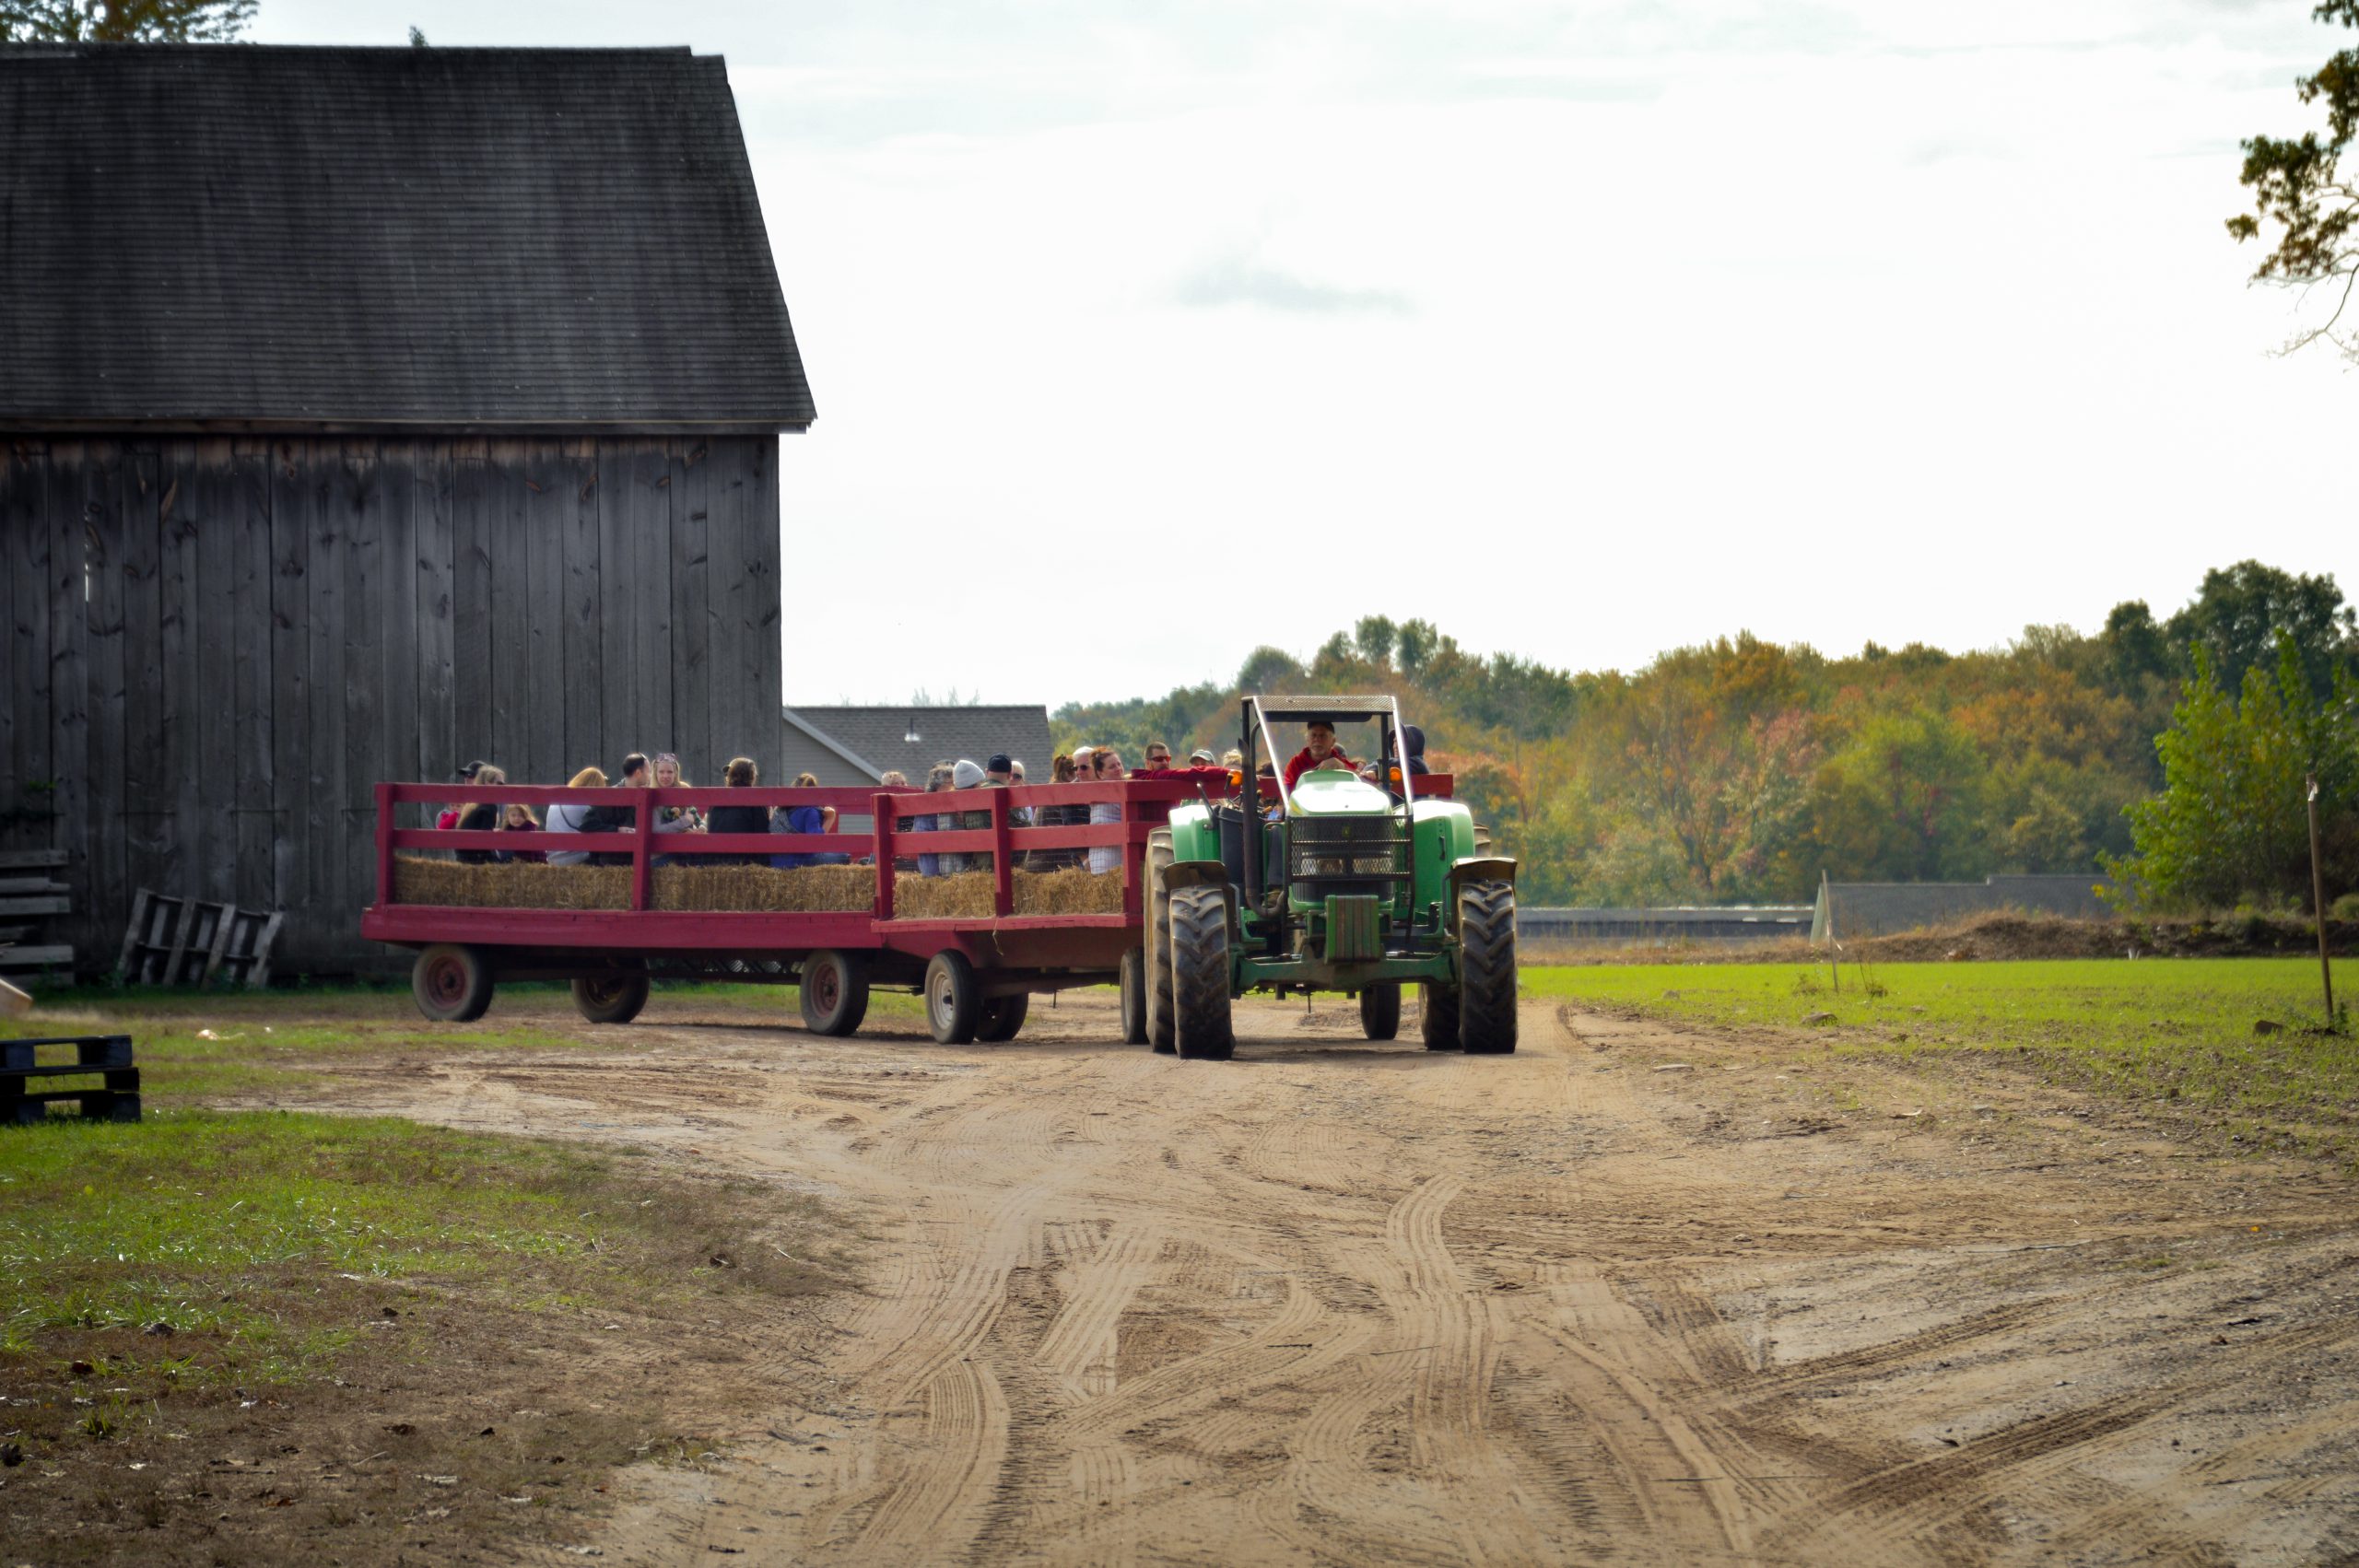 A tractor ride on a fall farm